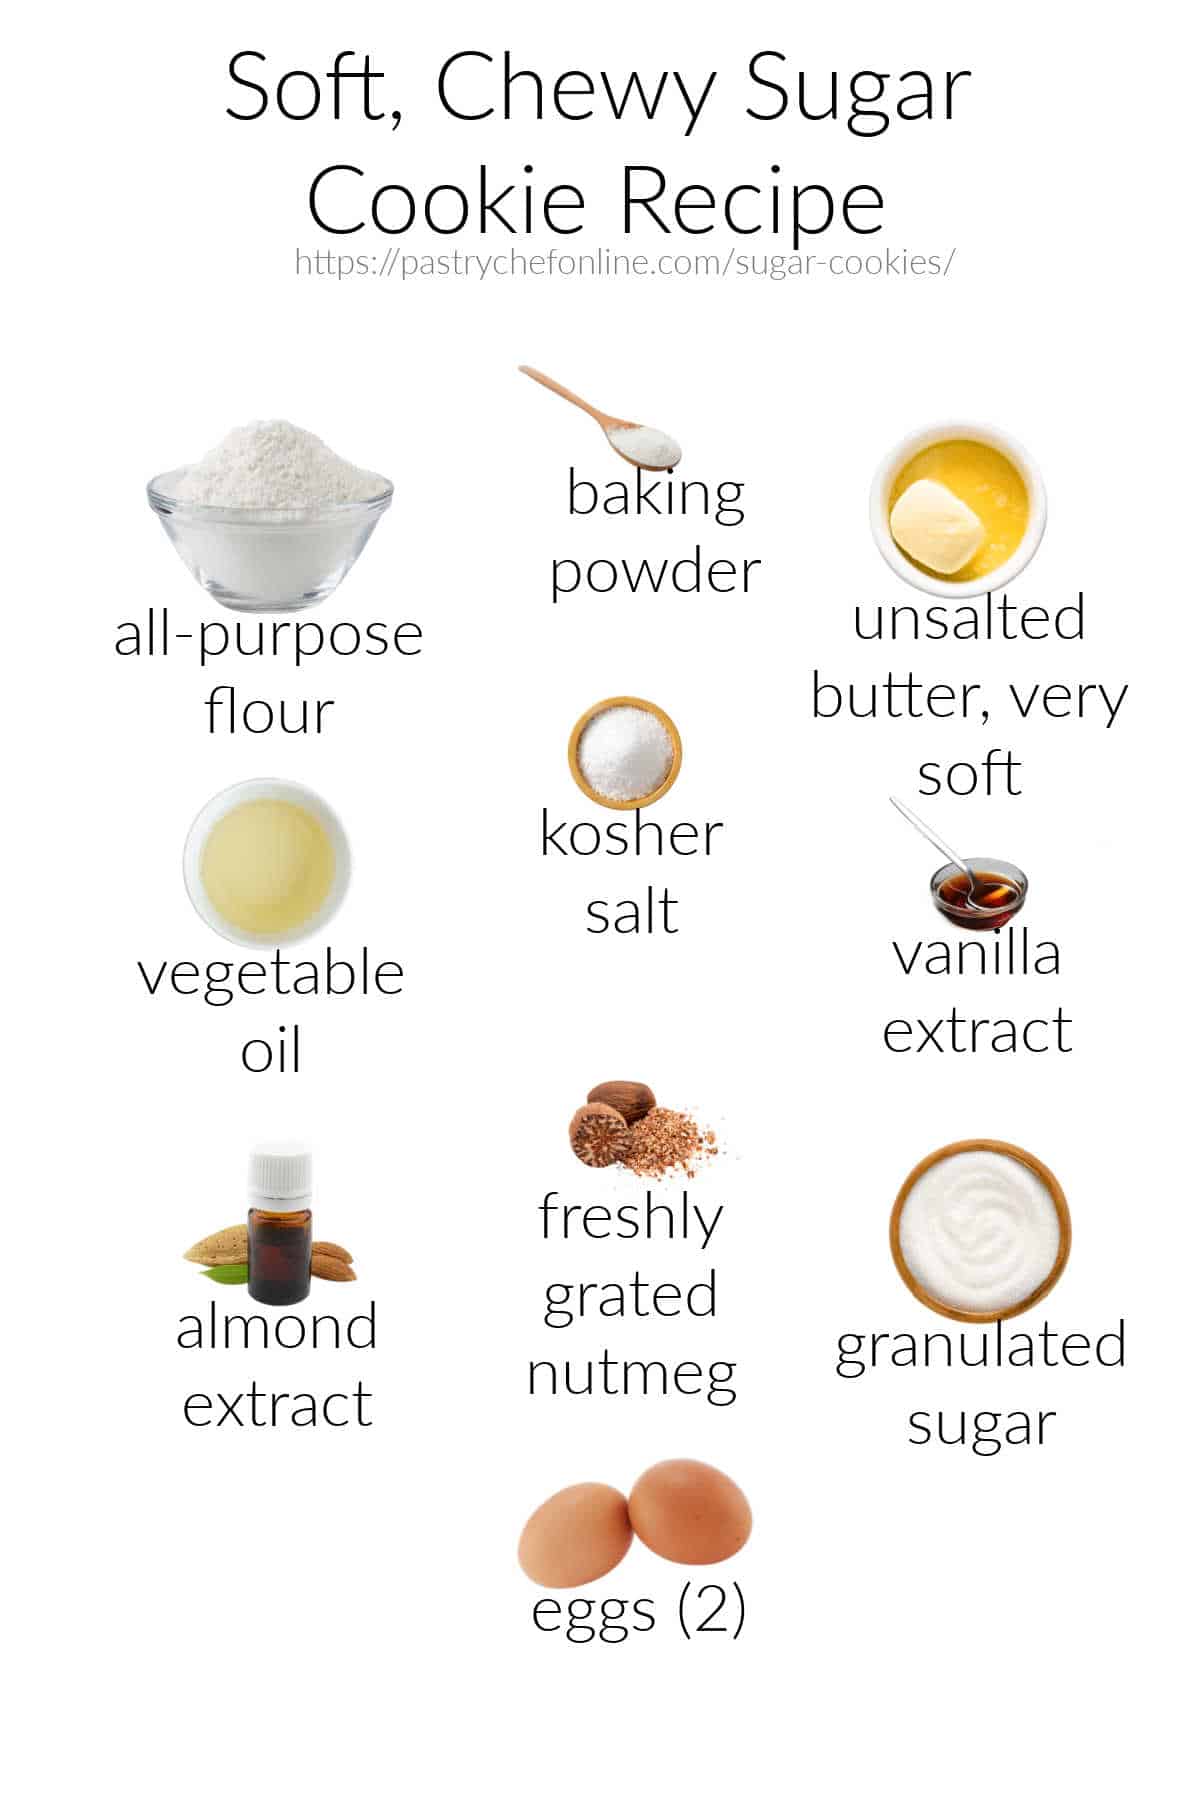 Full-color images of all the ingredients needed to make sugar cookies, arranged on a white background and labeled in black, sans serif font. Title text reads, "Soft, chewy sugar cookie ingredients," and the labeled ingredients are all-purpose flour, baking powder, unsalted butter (very soft), vegetable oil, kosher salt, vanilla extract, almond extract, freshly grated nutmeg, granulated sugar, and eggs (2).